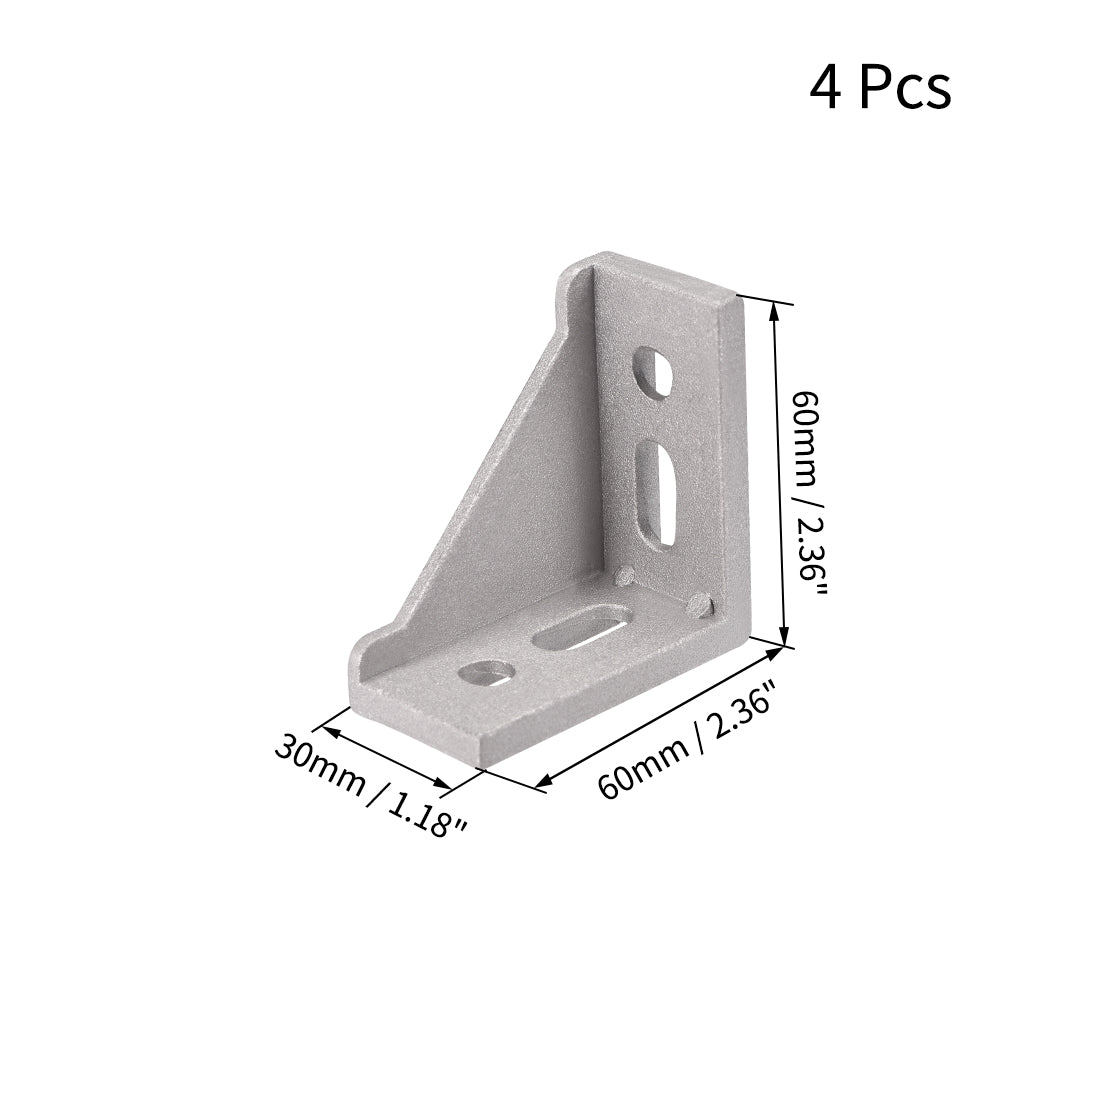 uxcell Uxcell Inside Corner Bracket Gusset, 60mm x 60mm for 3030 Series Aluminum Extrusion Profile with Slot 8mm, 4 Pcs (Silver)